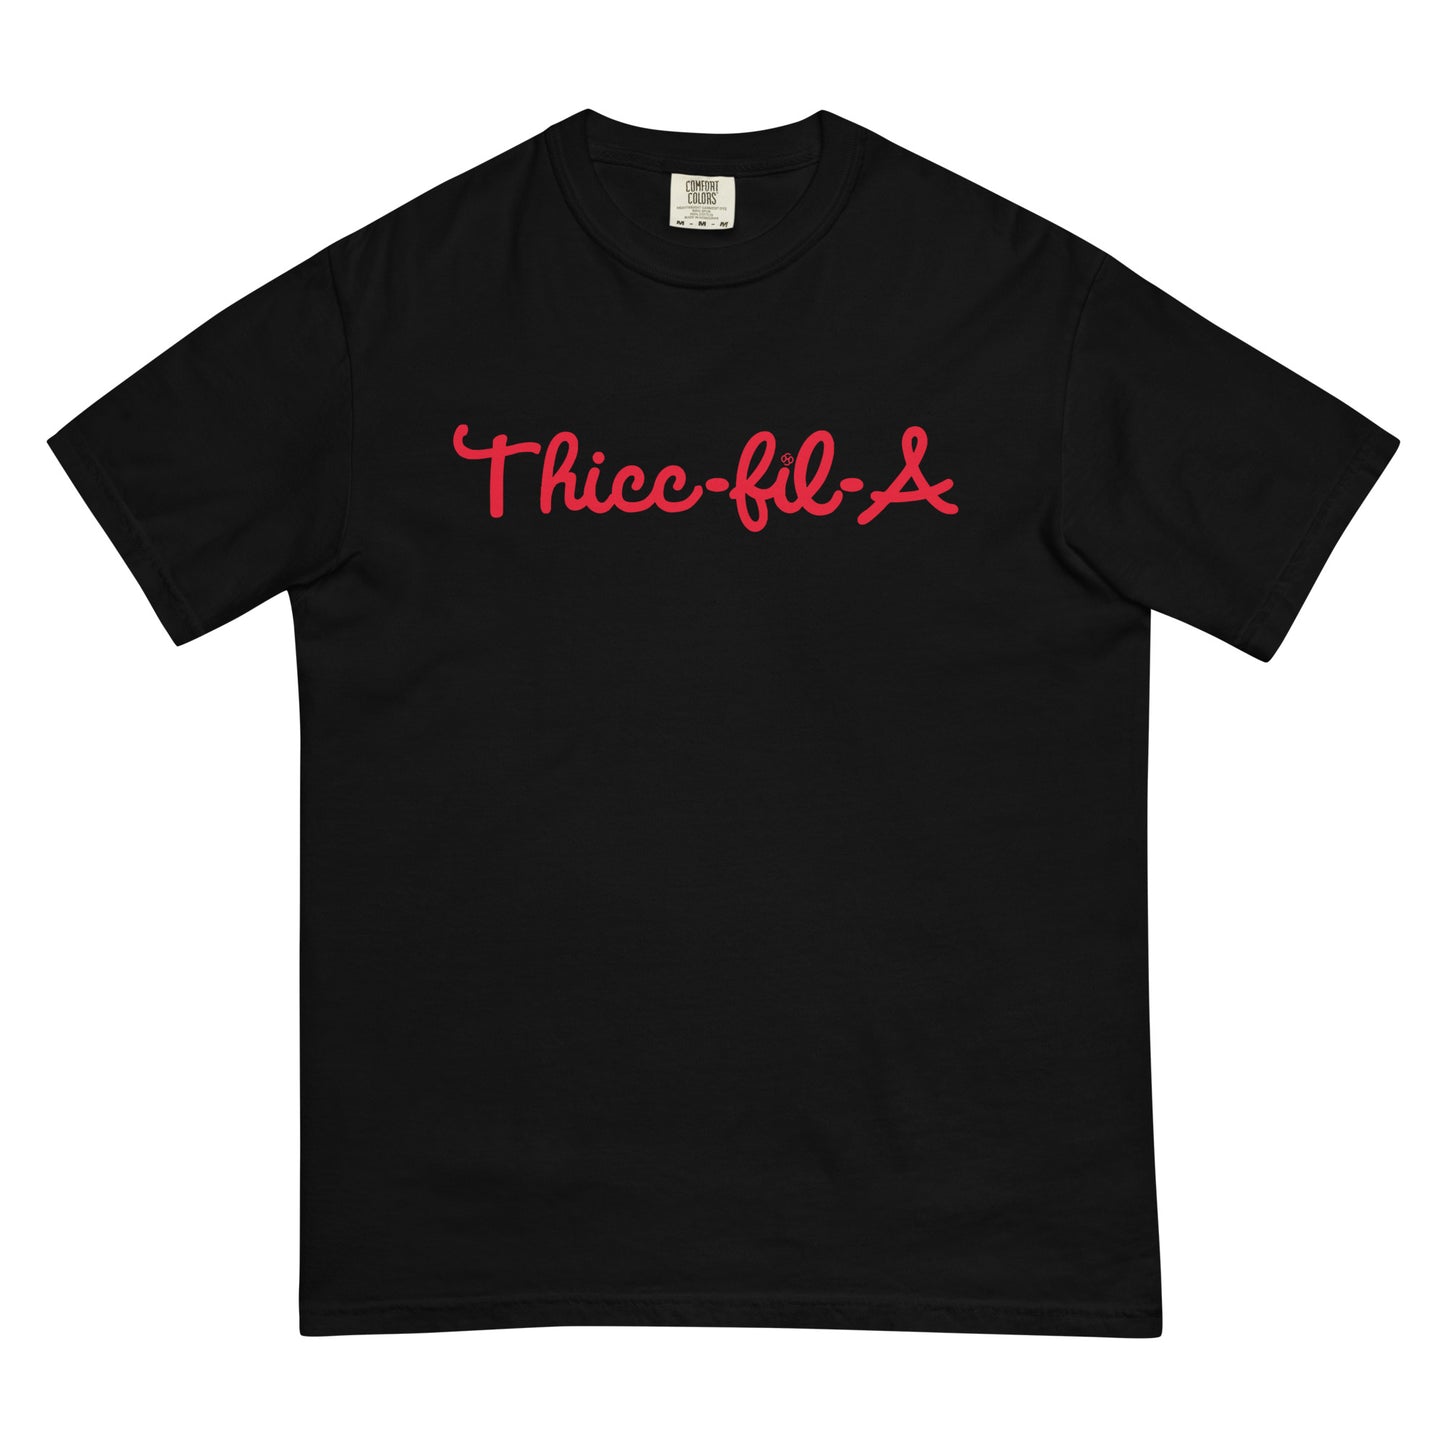 UNISEX OVERSIZED TEE - THICC FIL A